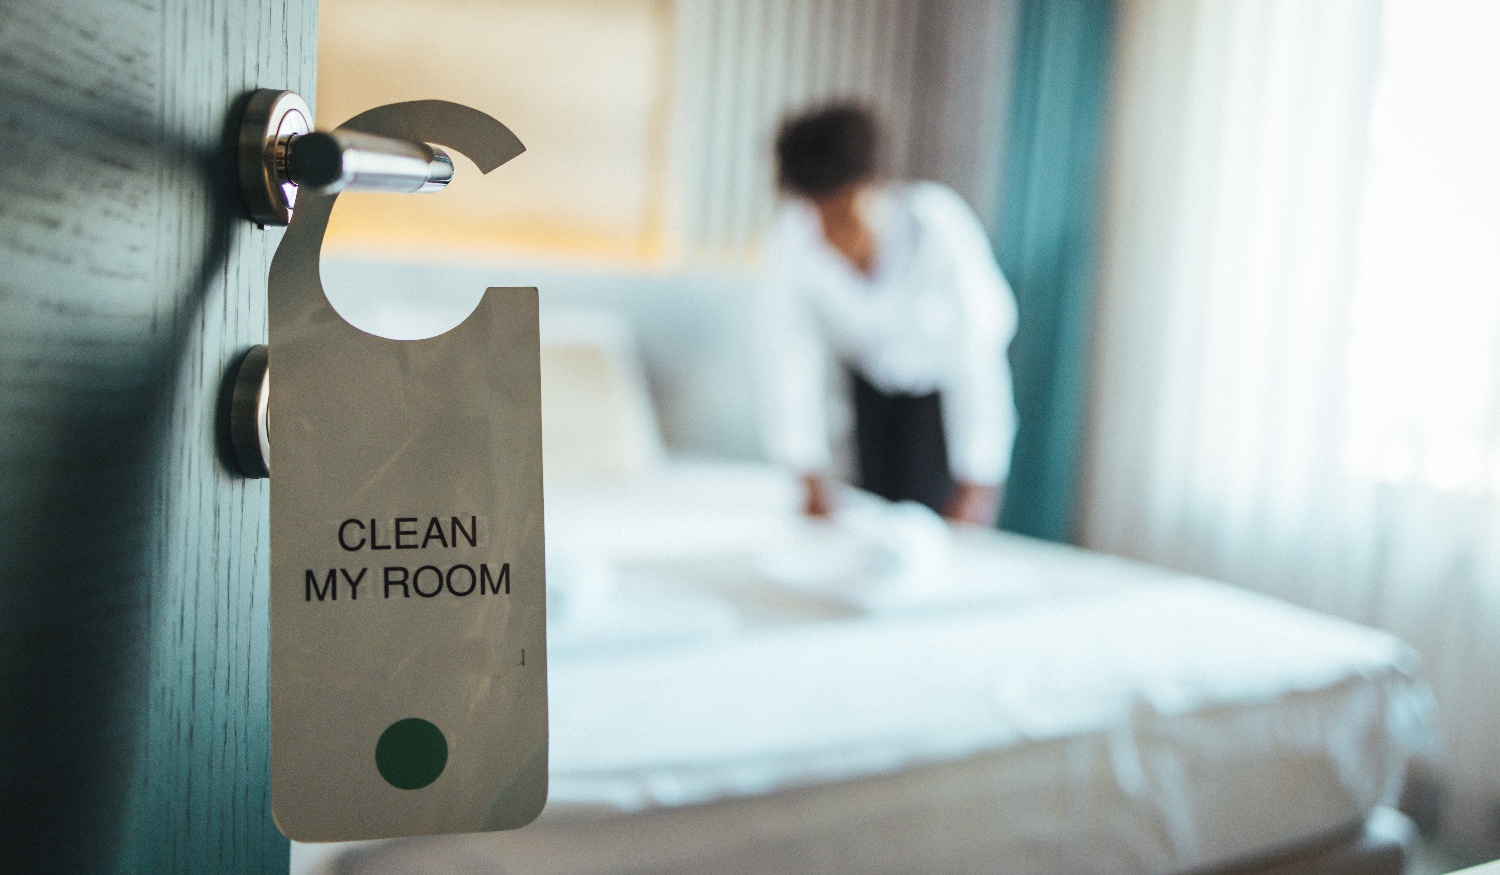 Tell-tale signs of poor accommodation cleaning